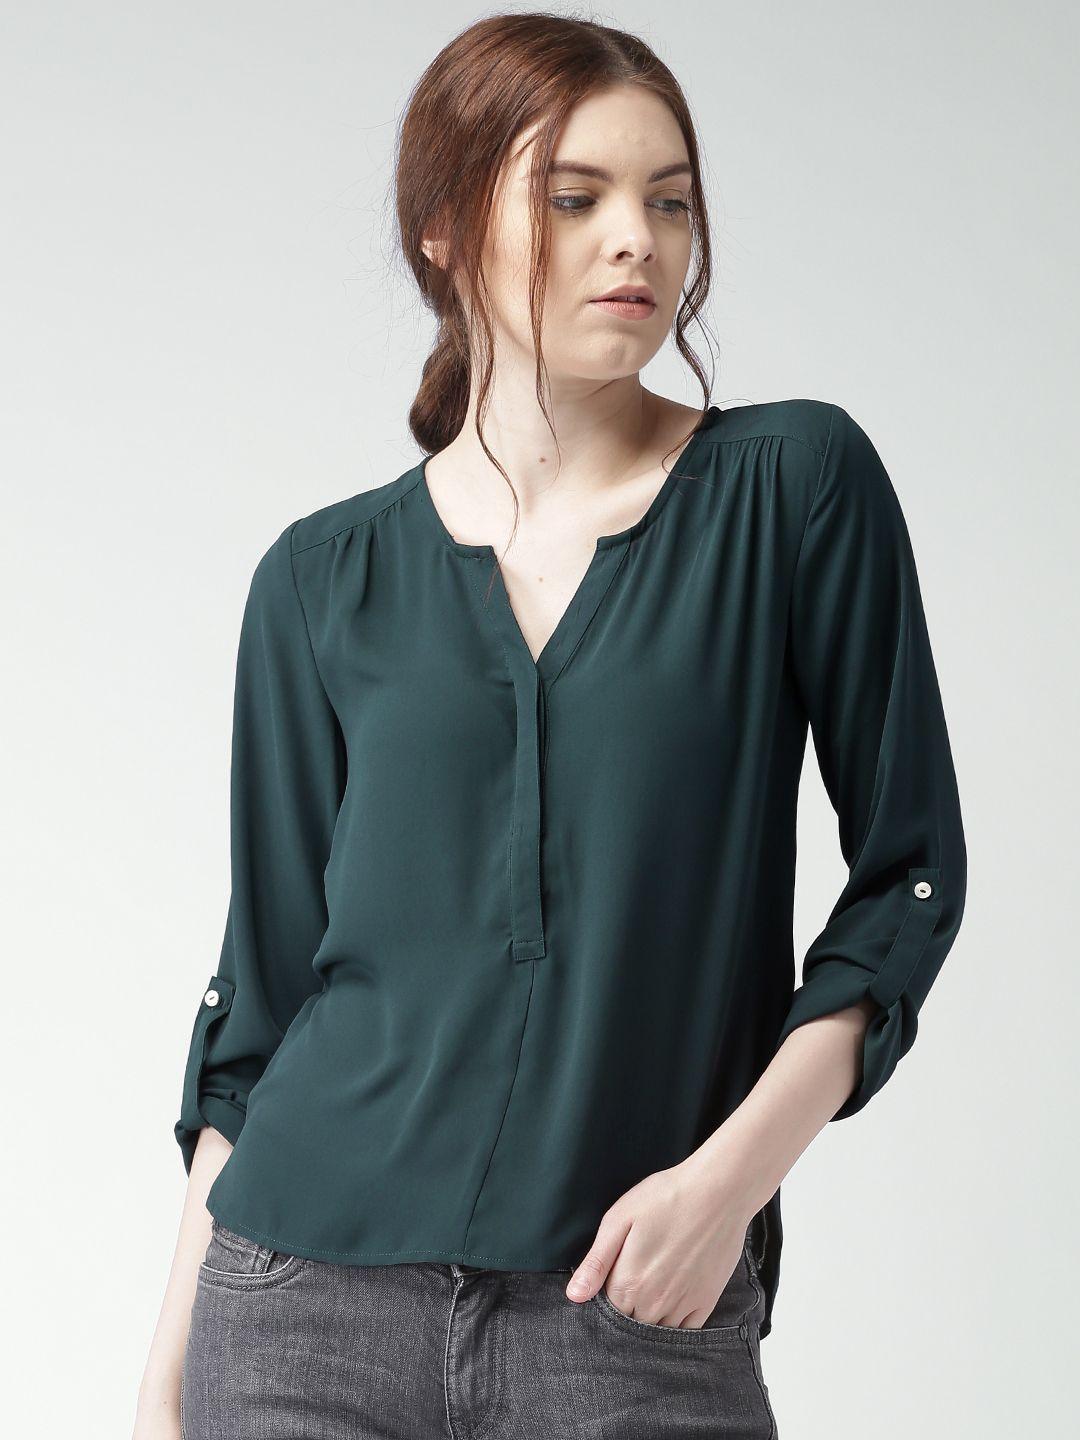 mast & harbour women teal blue solid shirt style top